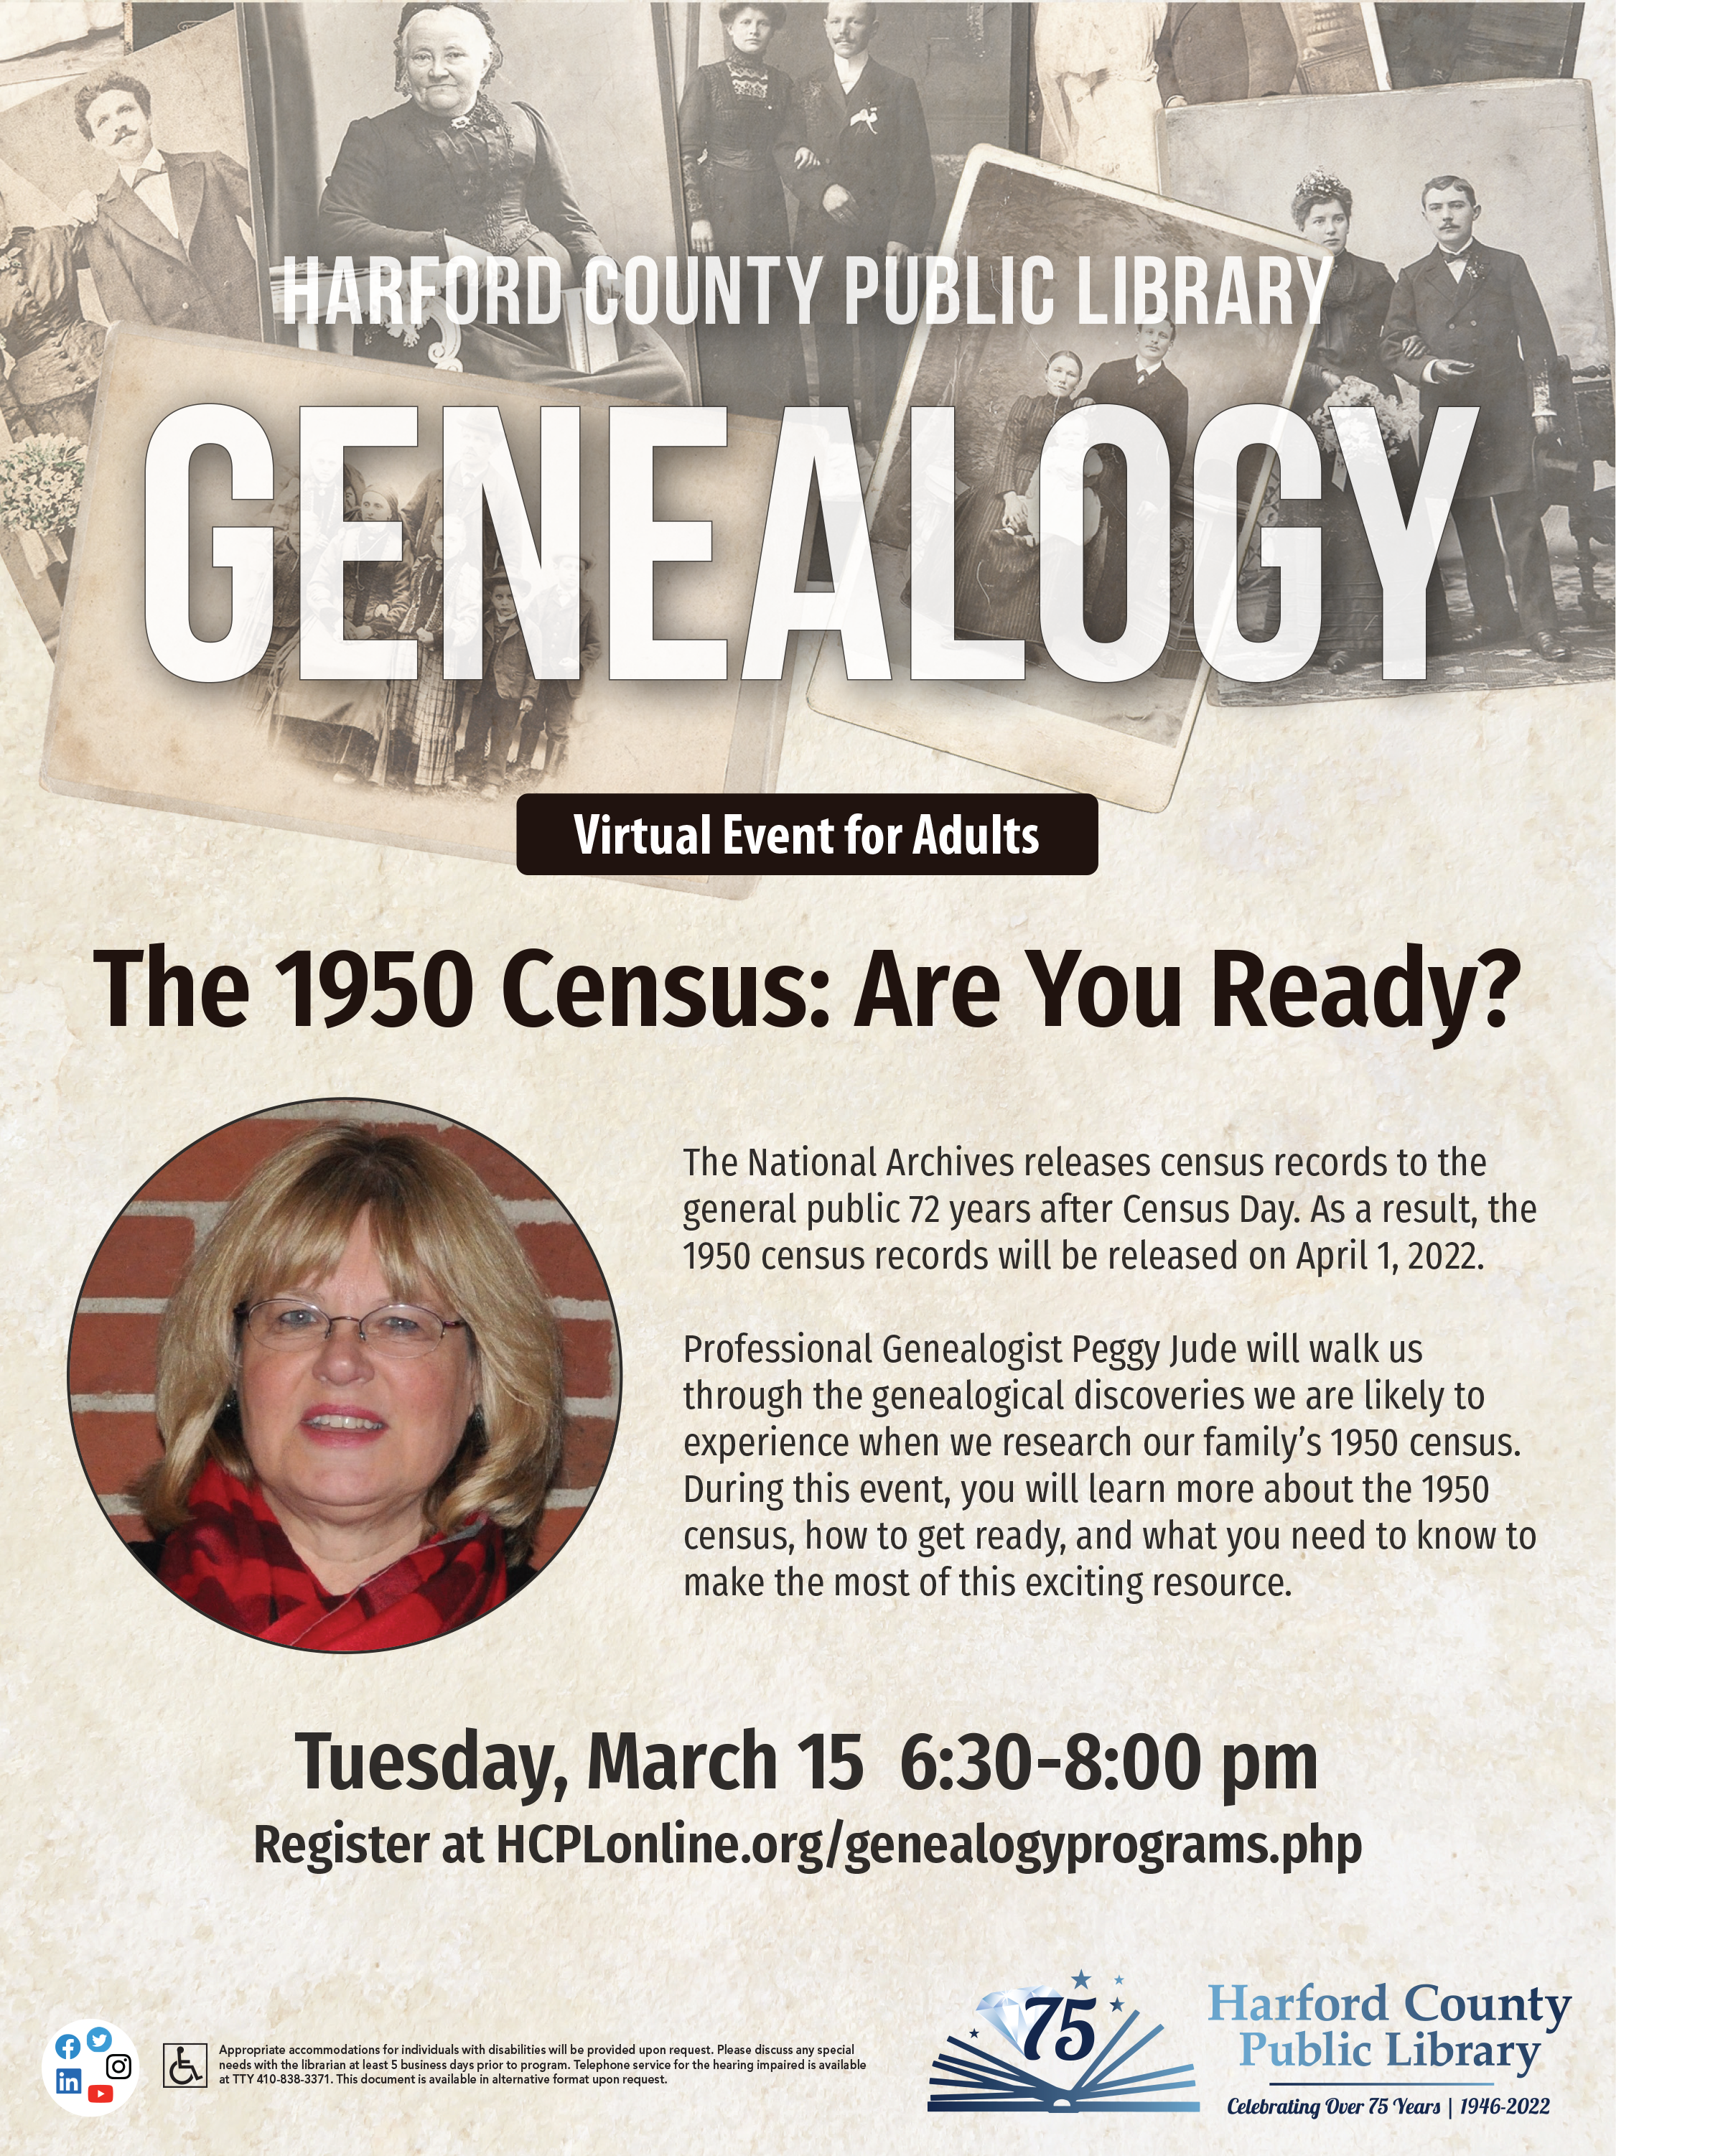 Genealogy - The 1950 Census: Are You Ready?